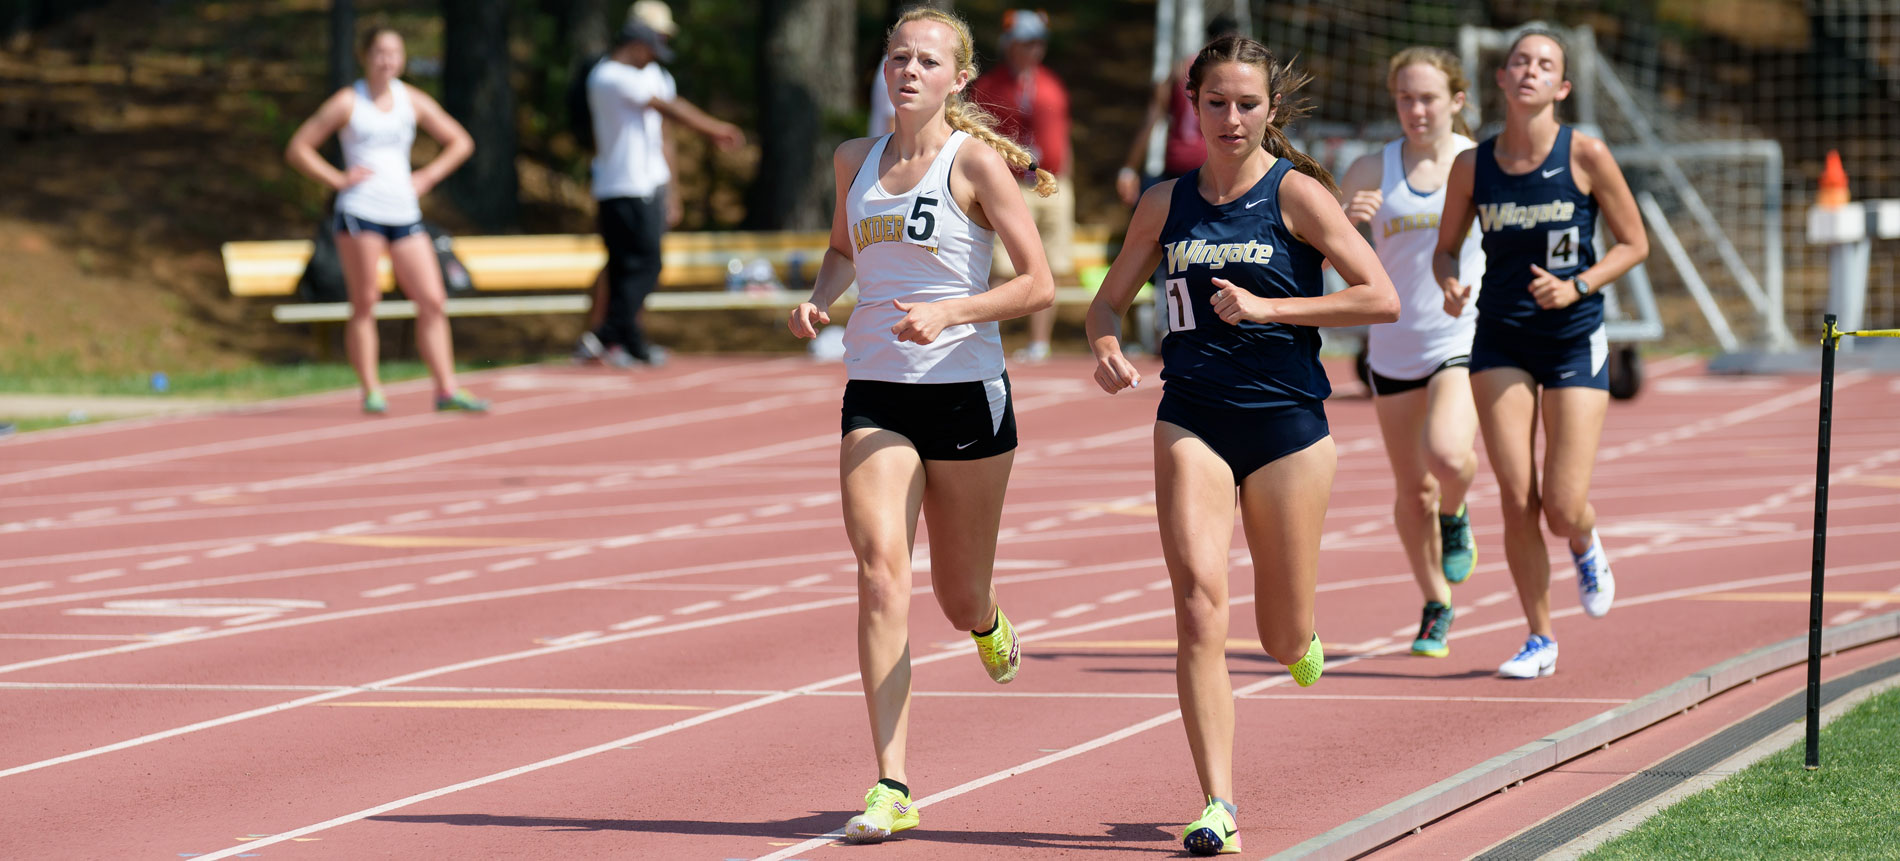 Bozarth Wins Women’s 5,000 Meter at East Tennessee State’s Tri-Star Classic